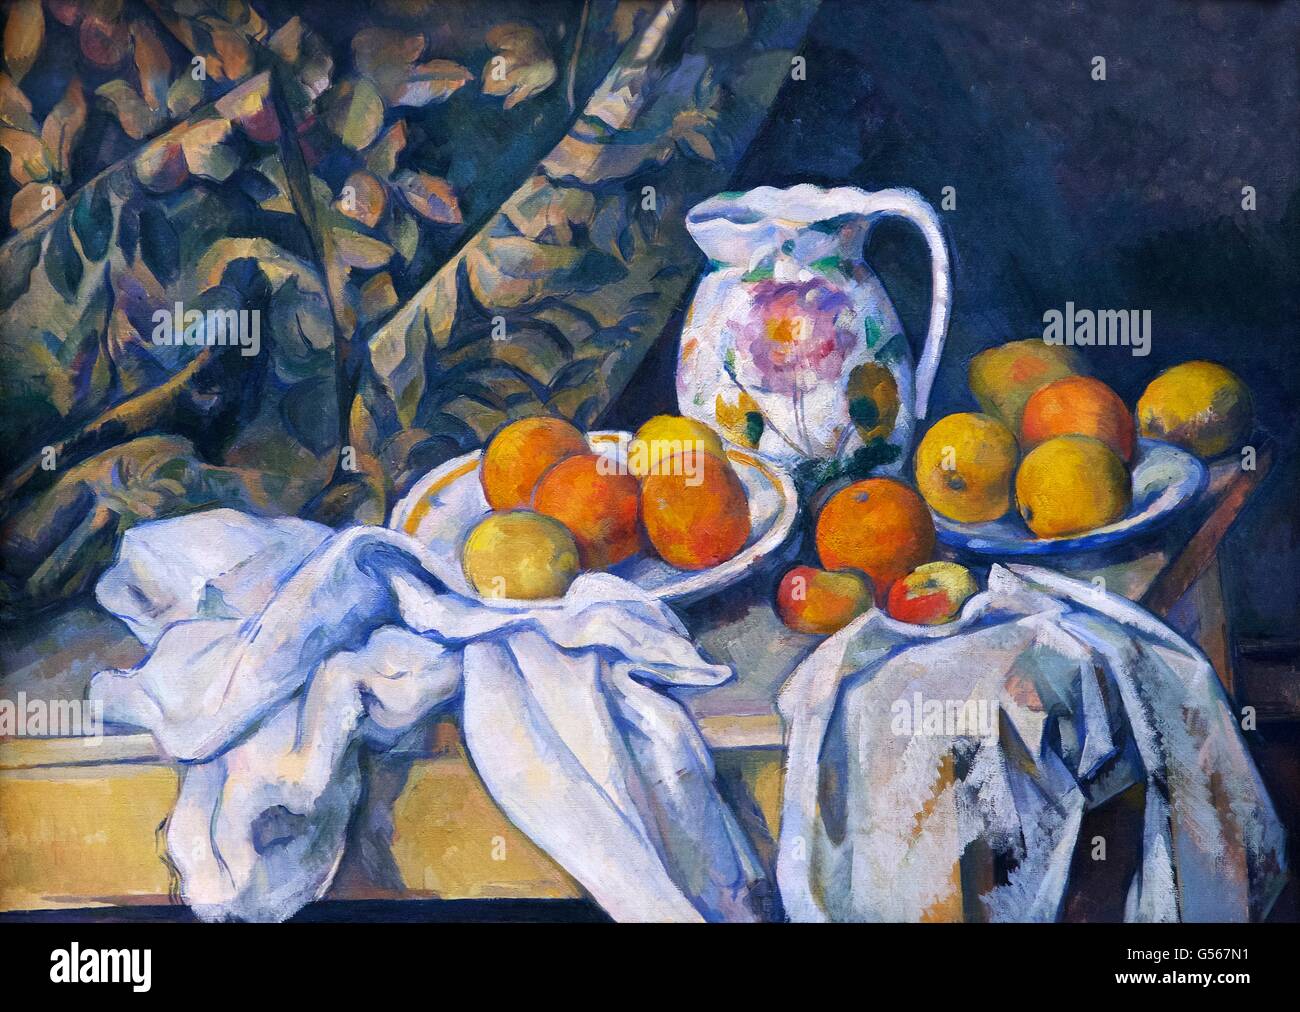 Still Life with Drapery, by Paul Cezanne, circa 1894-1895, State Hermitage Museum, Saint Petersburg, Russia Stock Photo